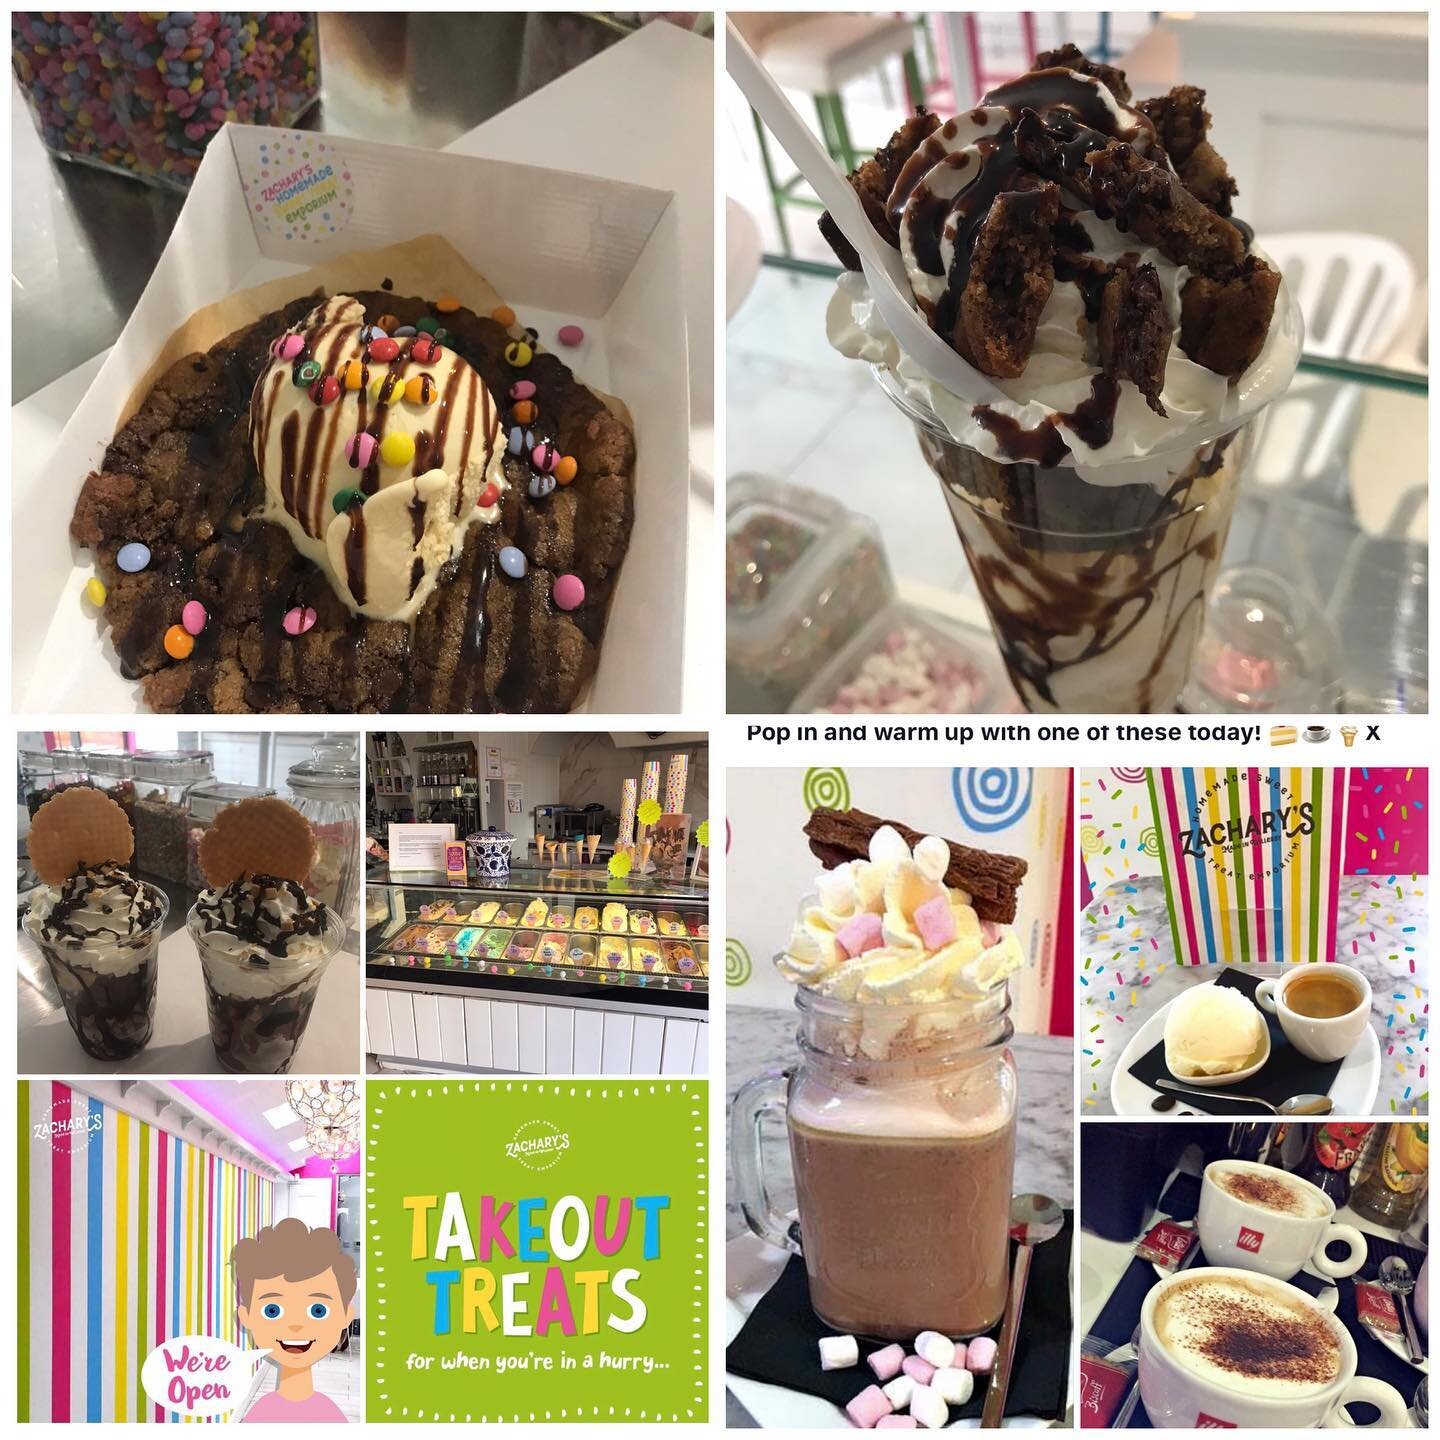 Open today 12-5 for takeaway or collection.Cheer up a miserable day with sweet treats.🍦🍪🍨🥤☕️x